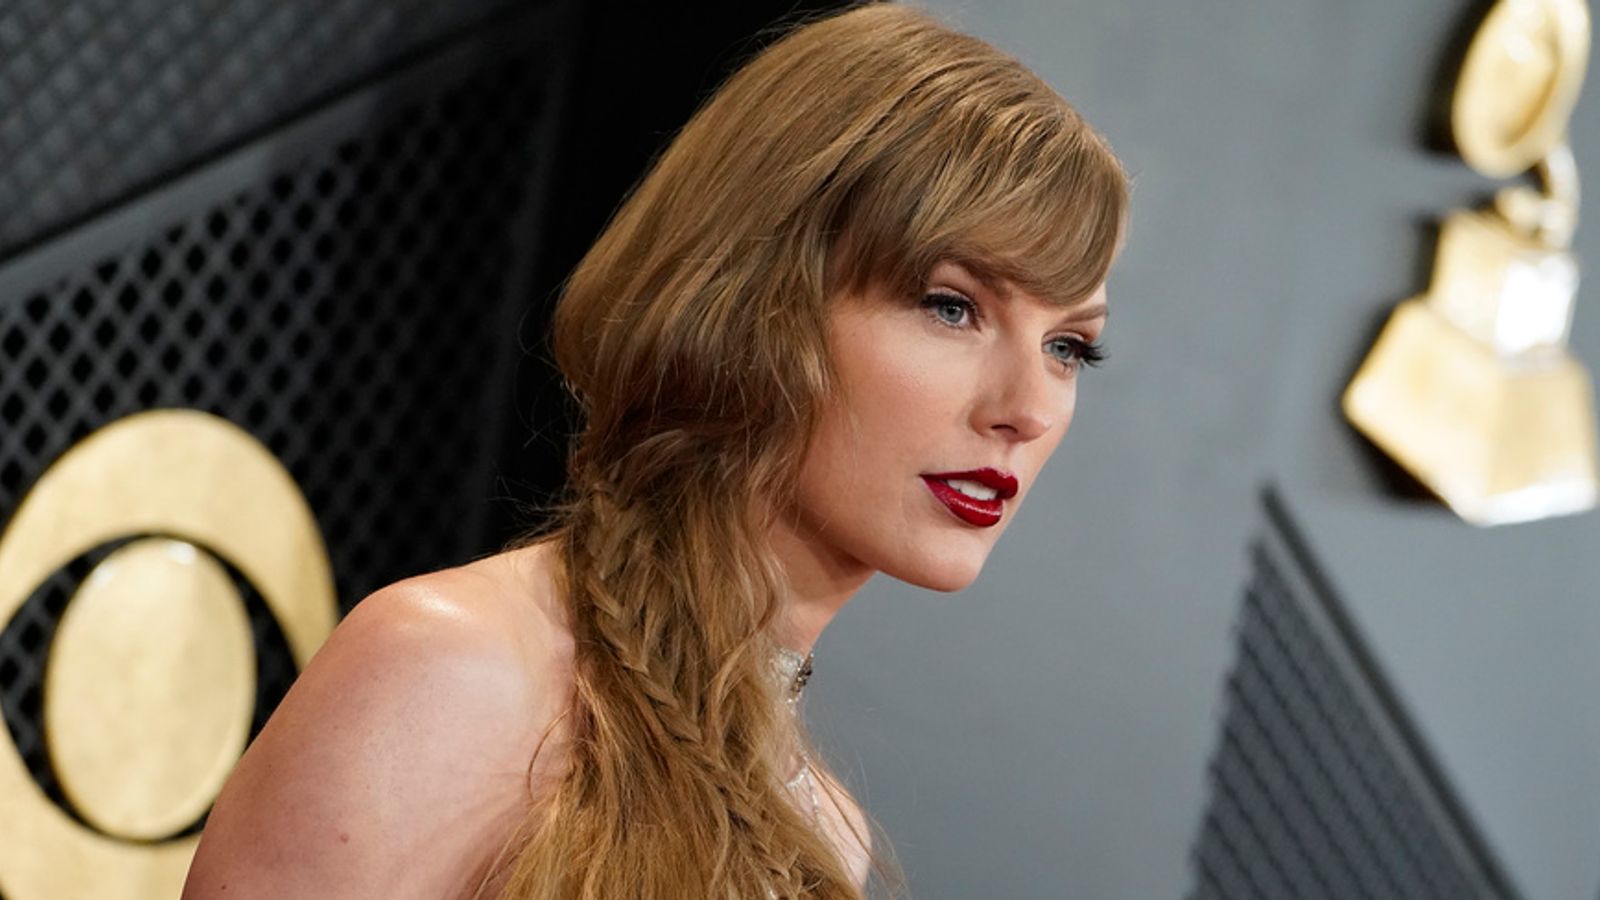 Taylor Swift's lawyers threaten legal action against student who tracks her private jet